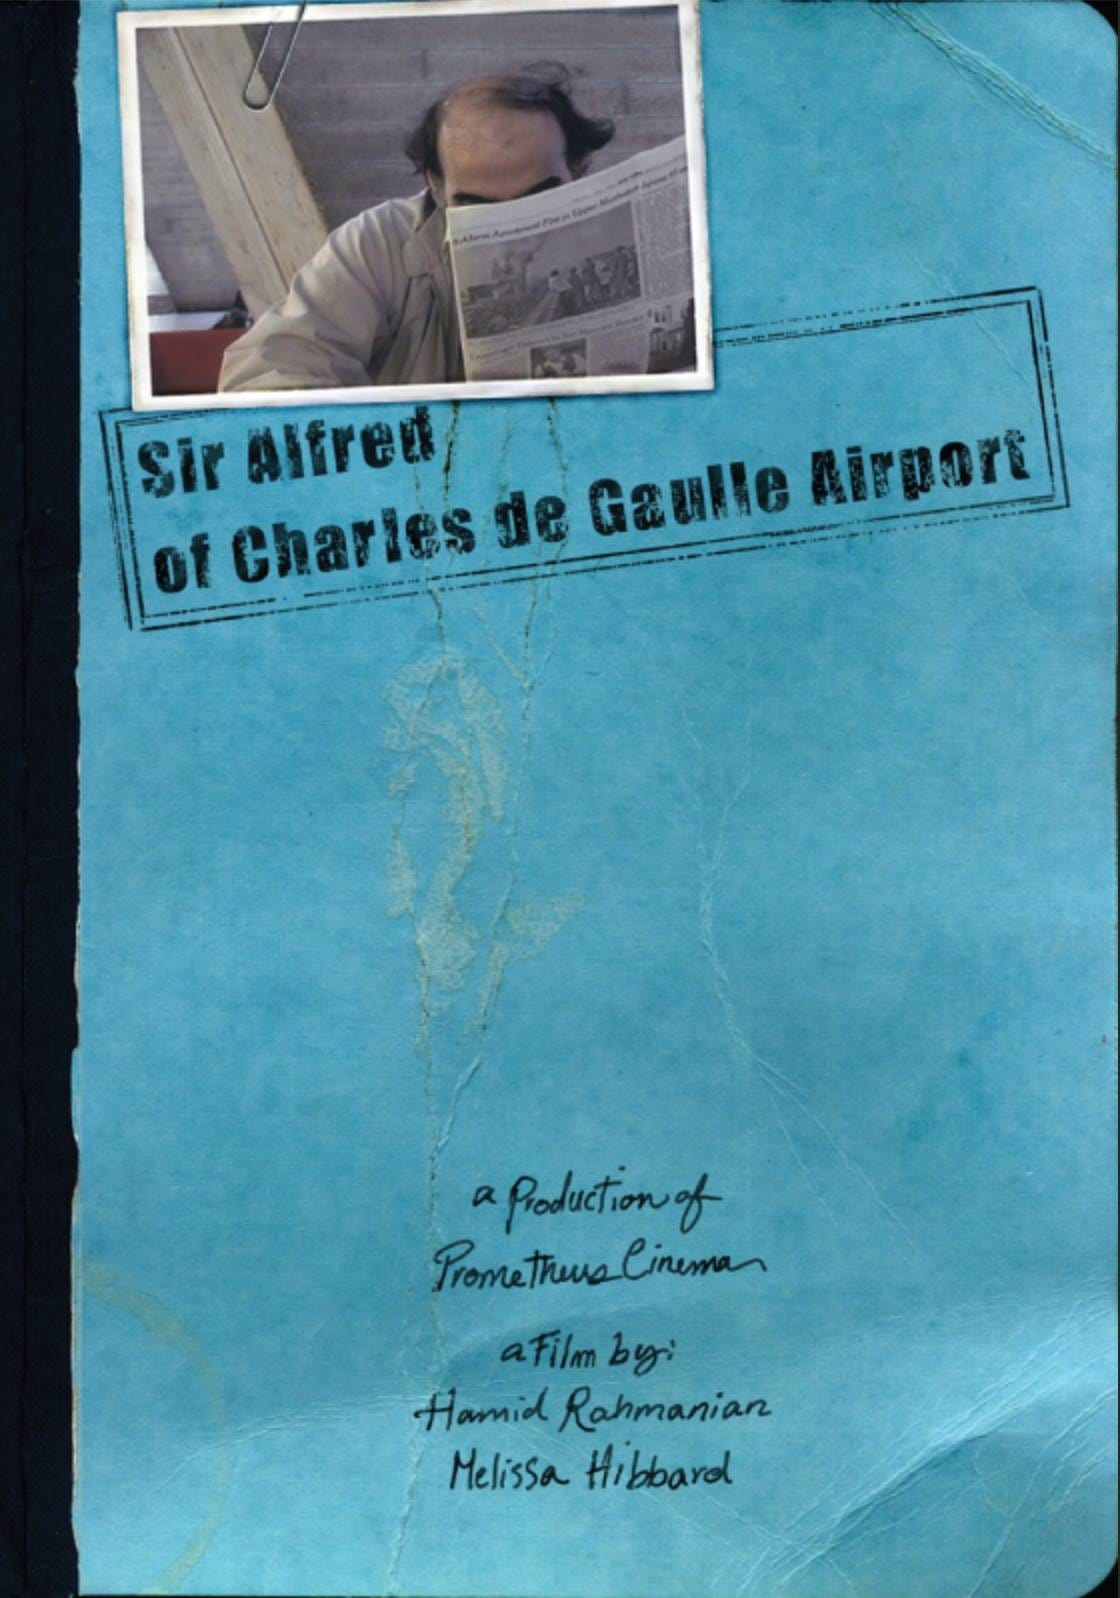 Sir Alfred of Charles de Gaulle Airport Poster